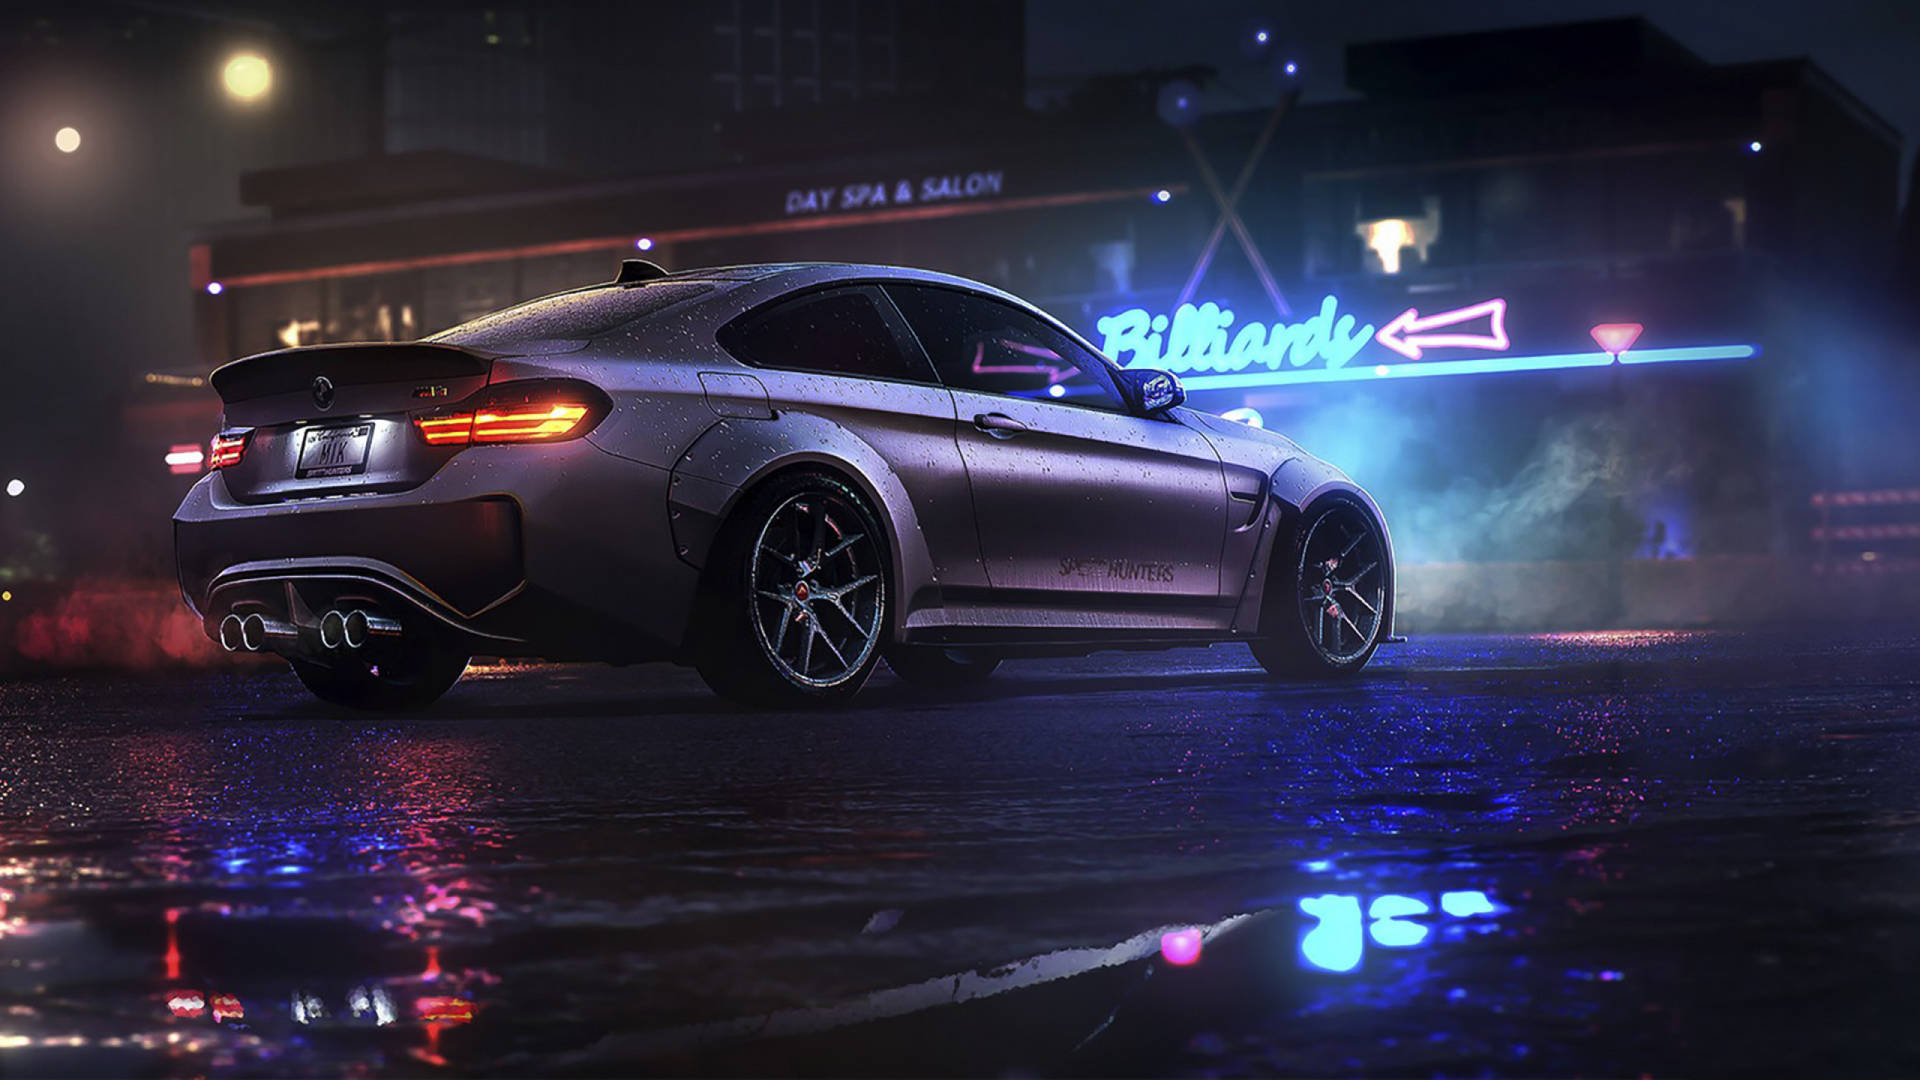 Zoom down the street in style in this sharp 2560 X 1440 car Wallpaper